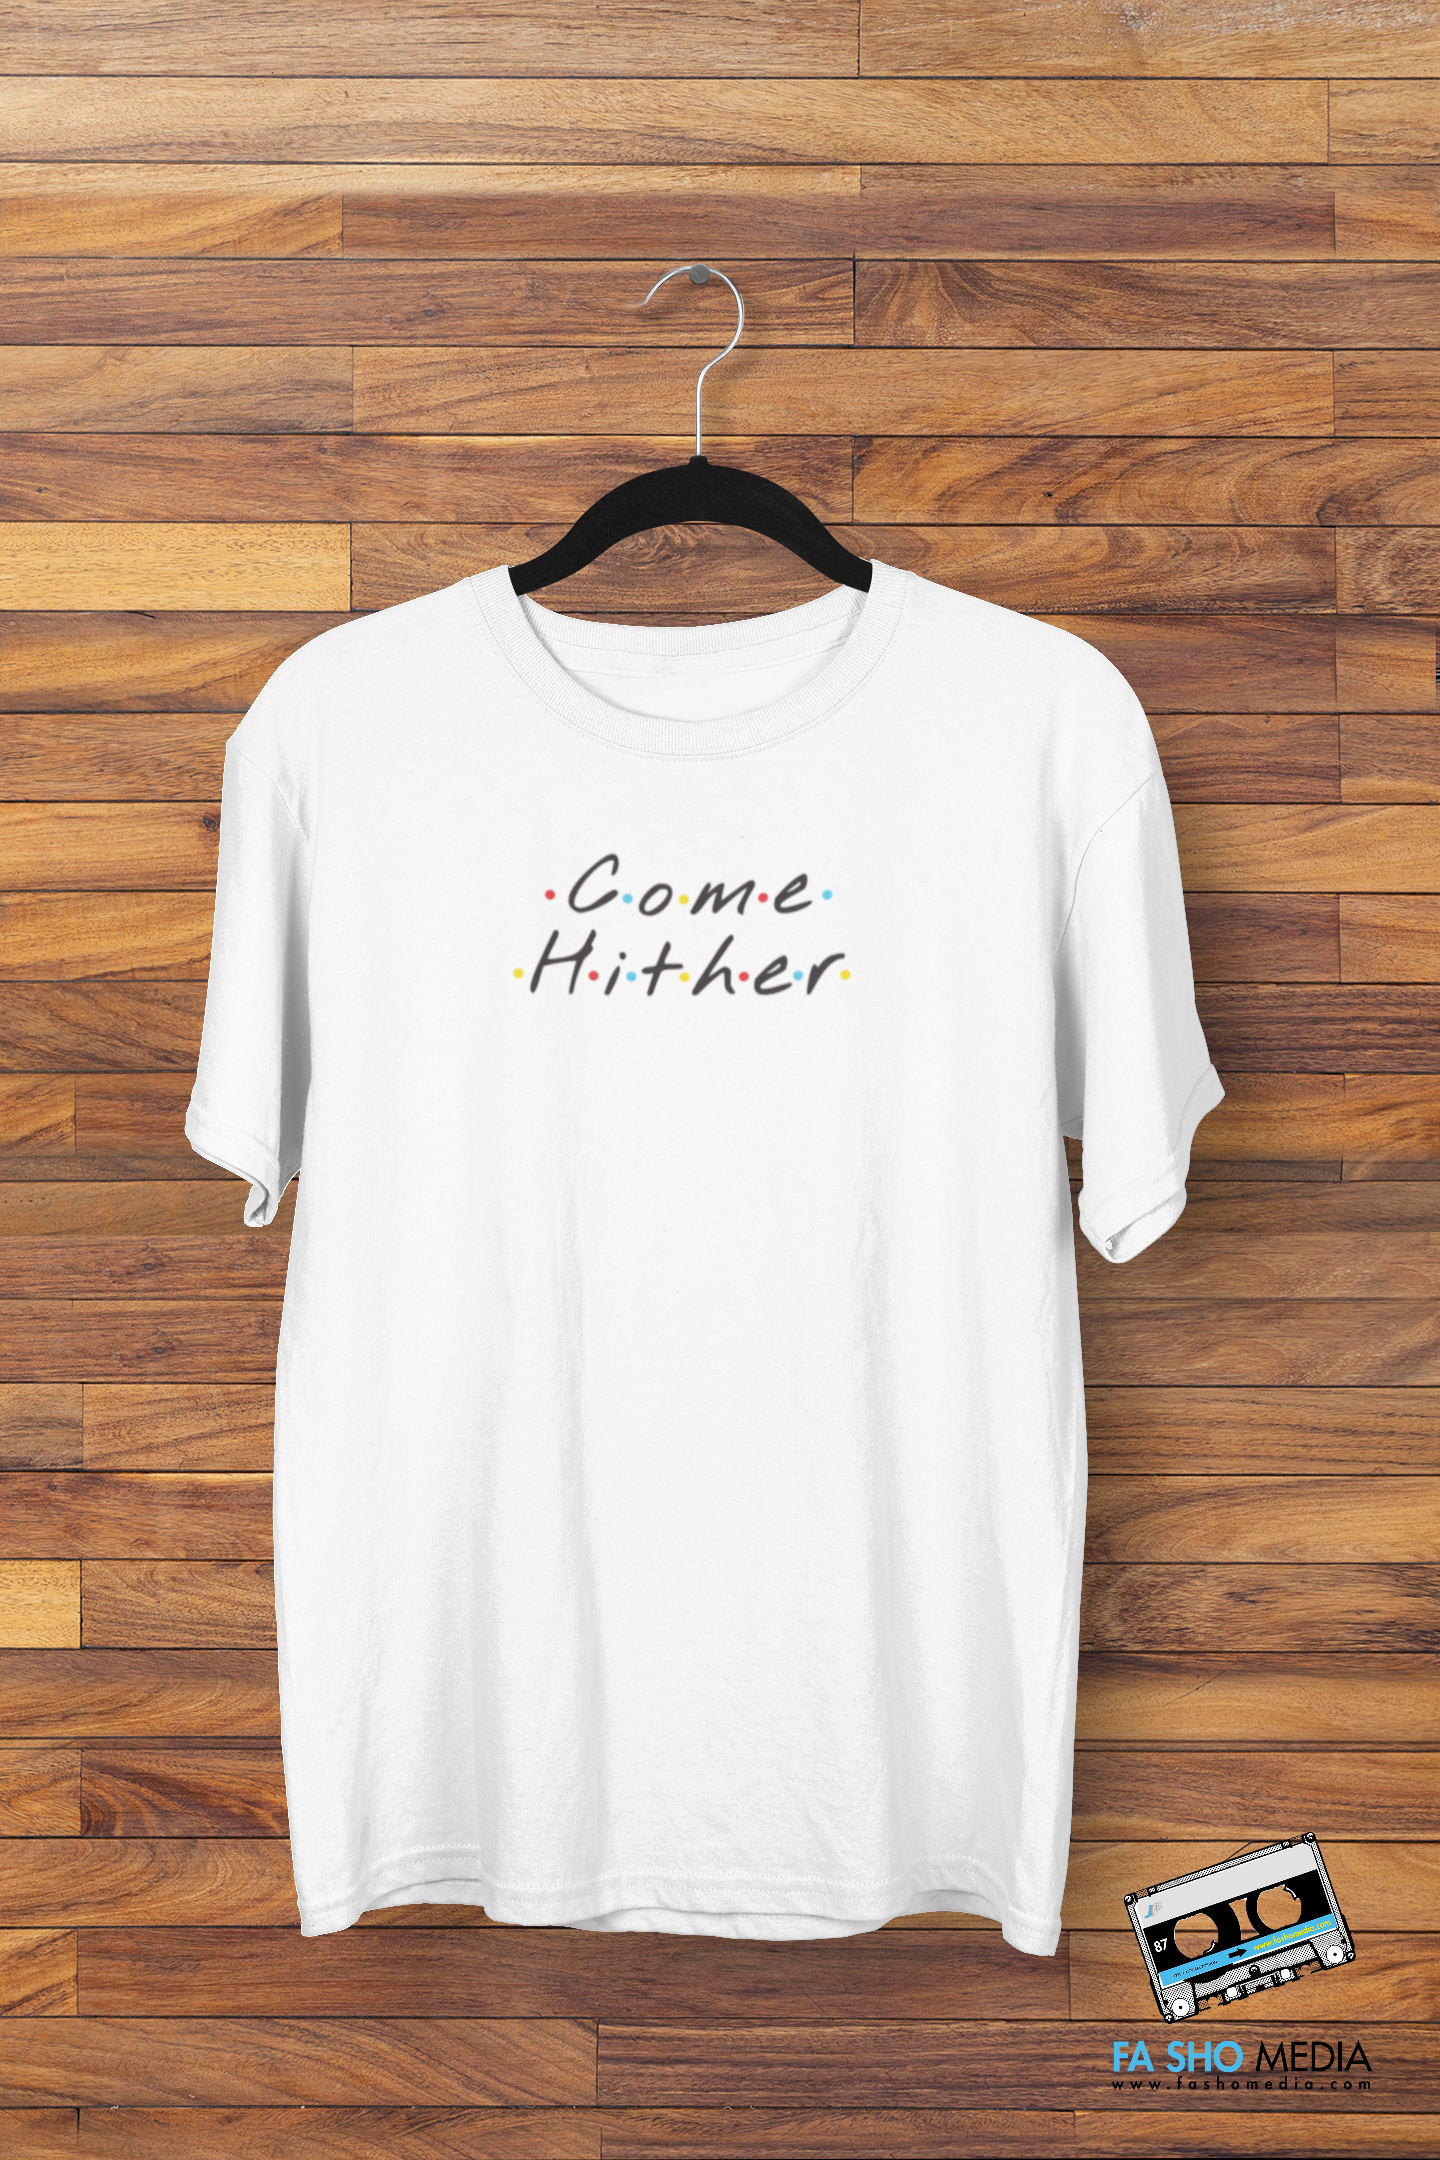 Come Hither Shirt (Men's)